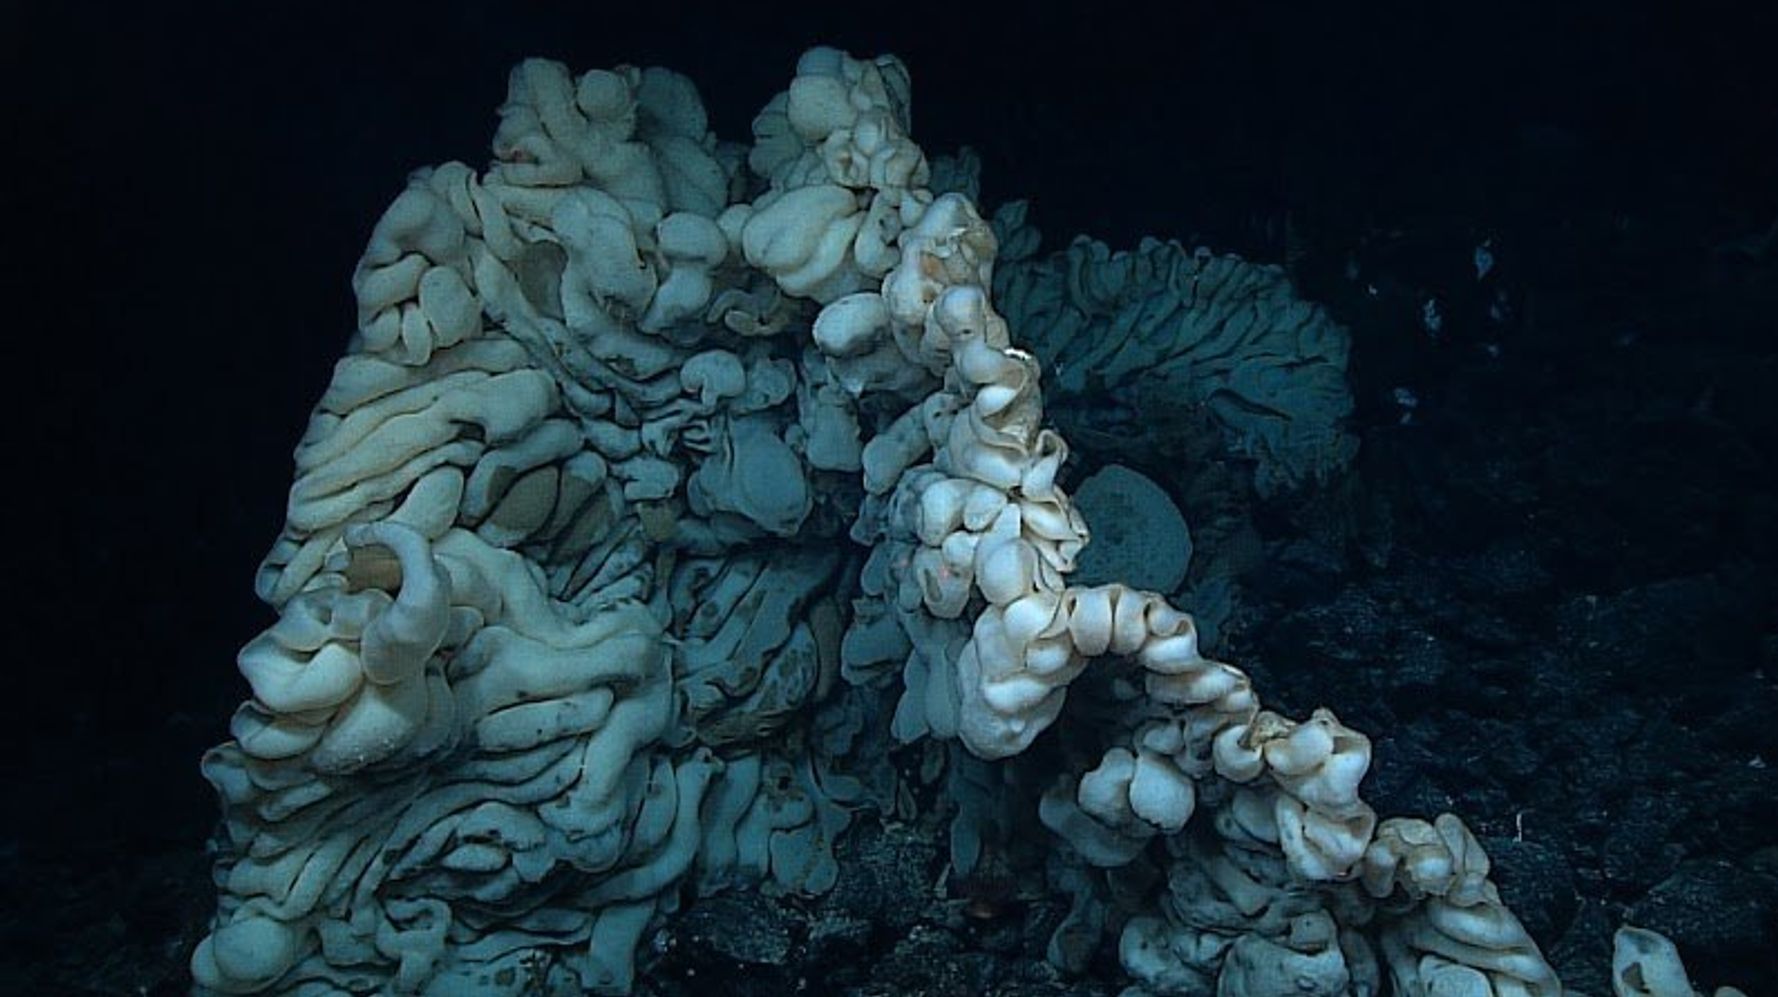 17 Fascinating Facts About Sea Sponges - Underwater360